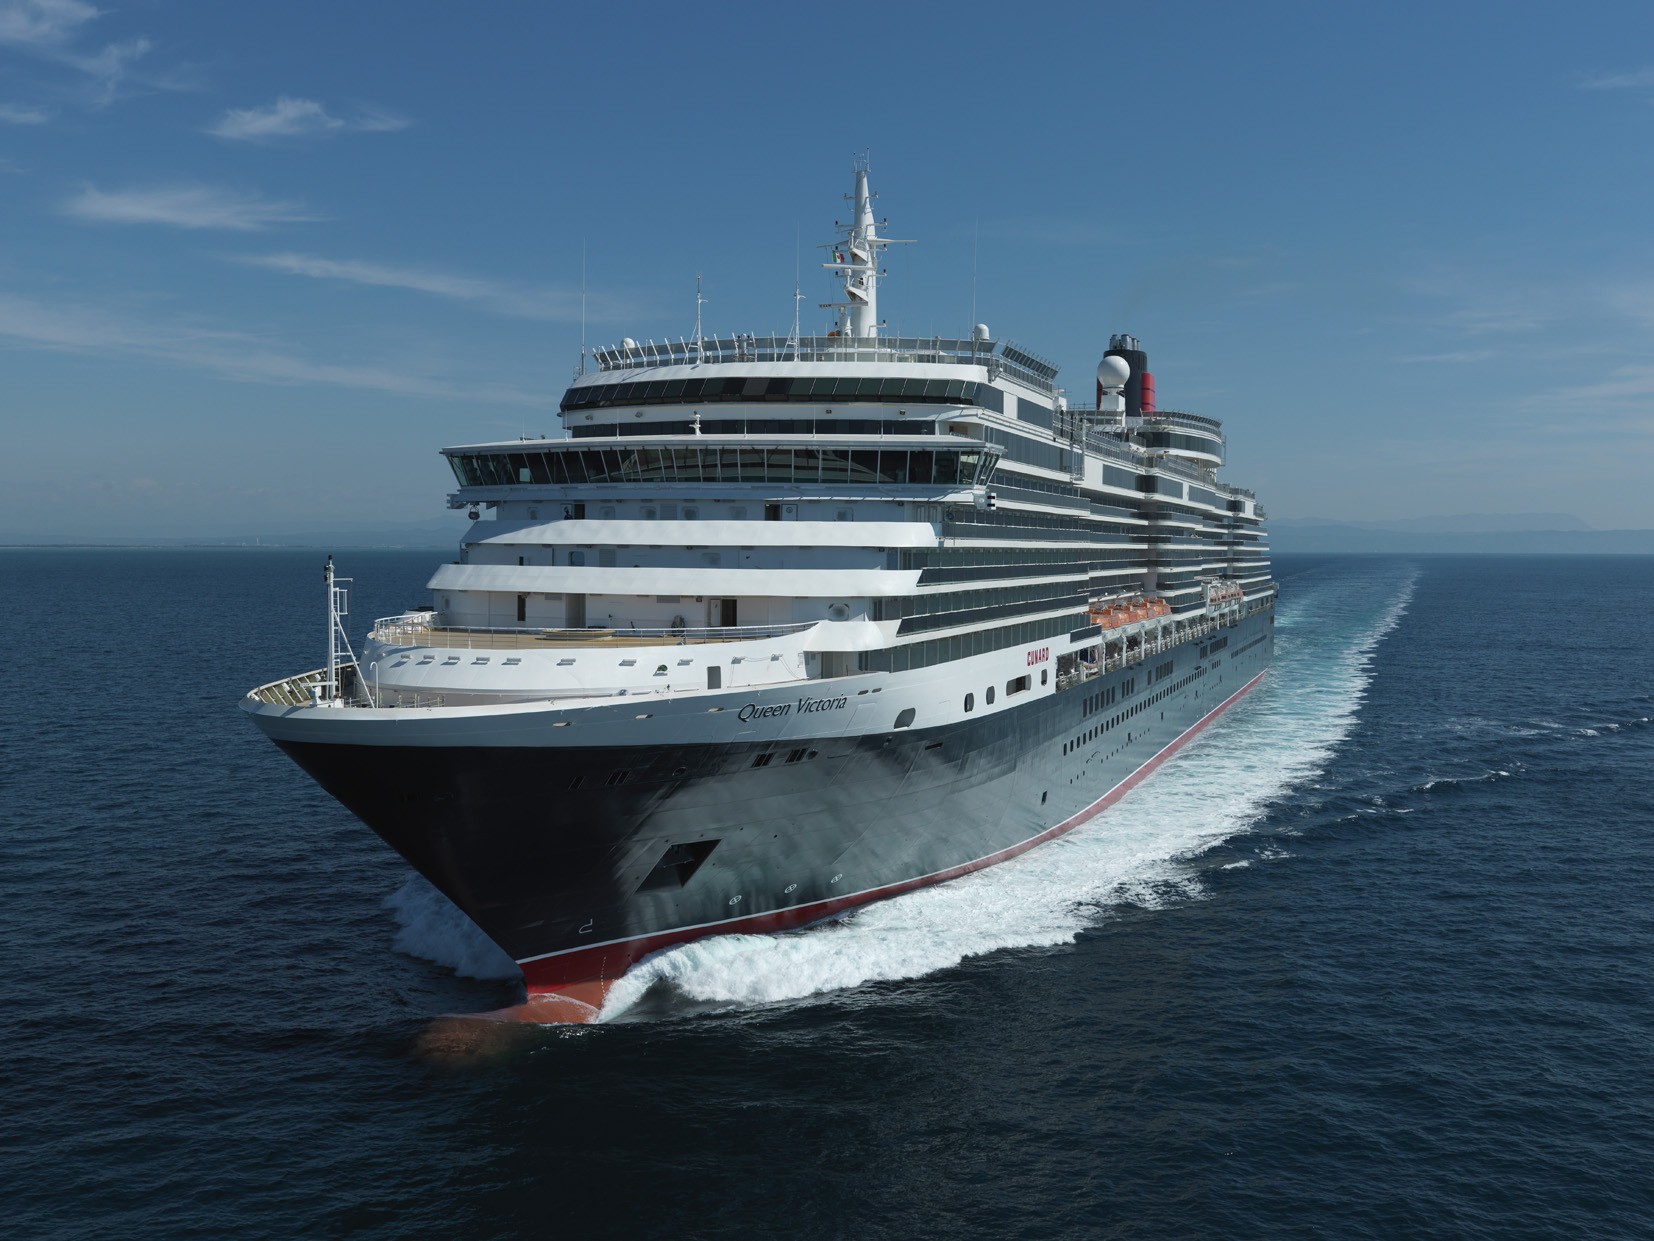 cunard cruises from the uk